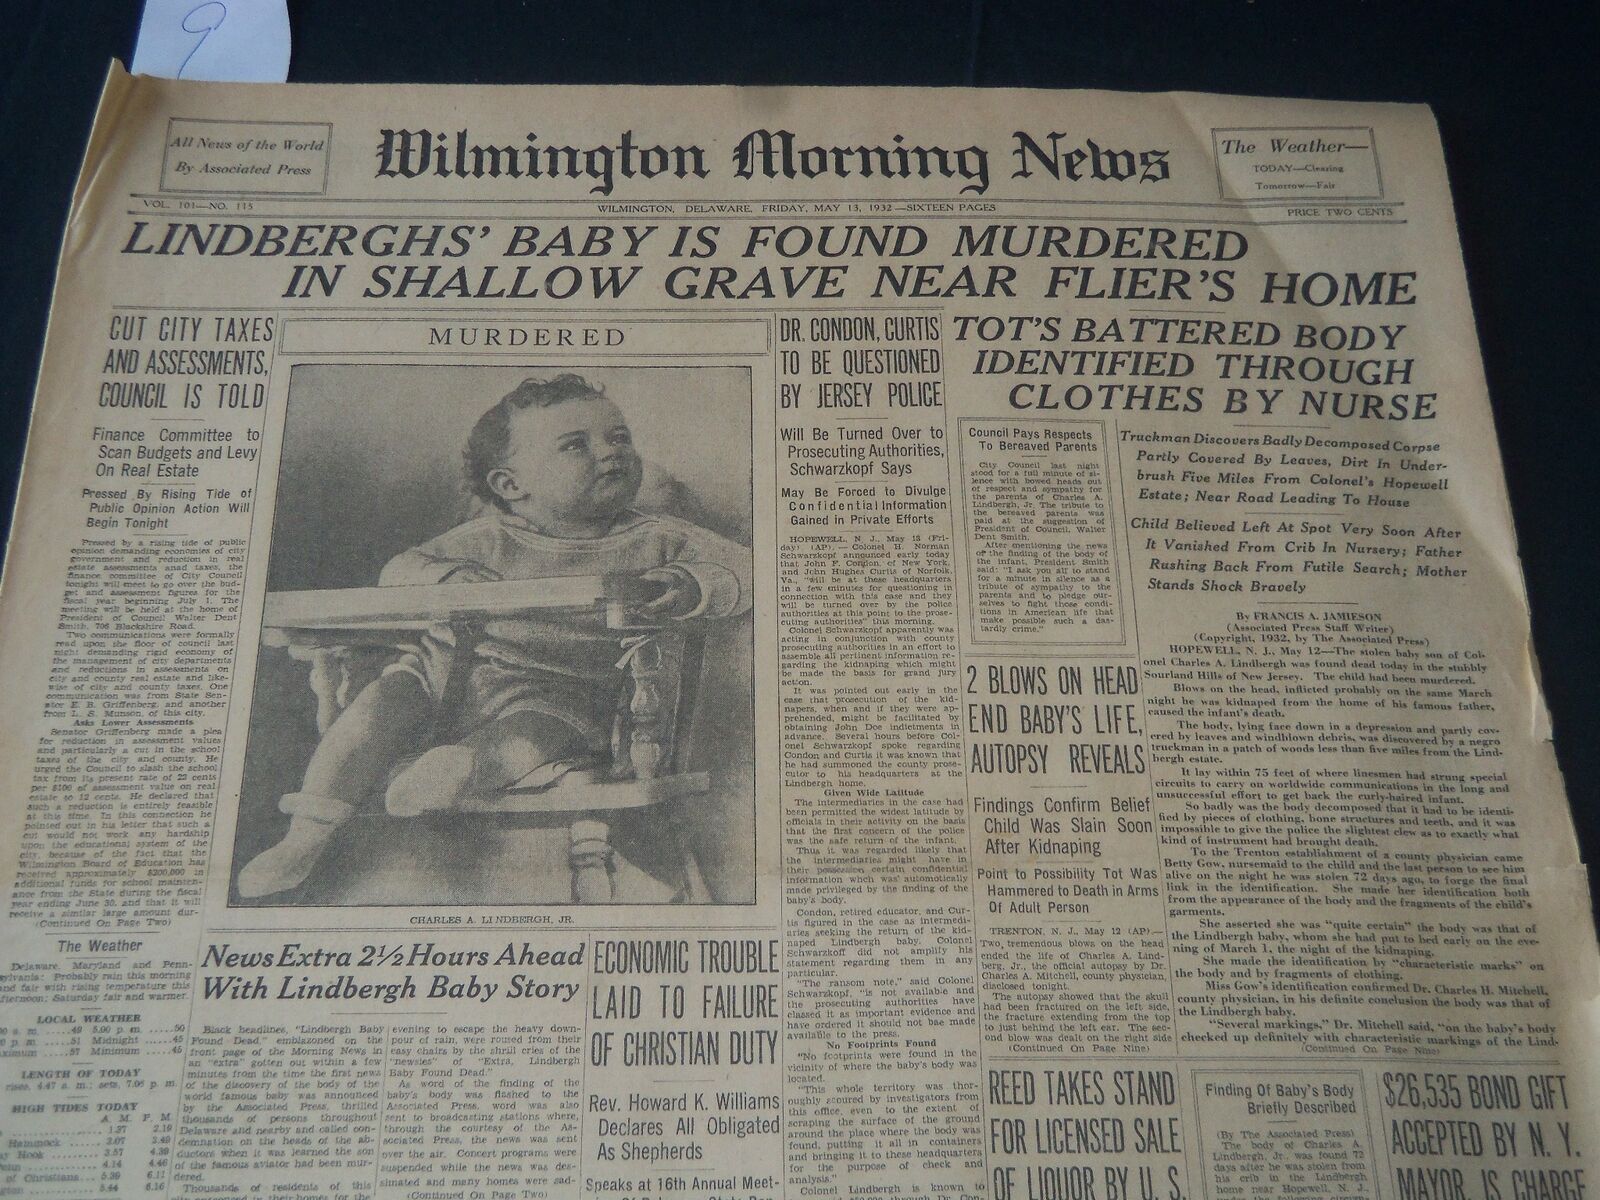 1932 MAY 13 WILMINGTON NEWS NEWSPAPER - LINDBERGH'S BABY FOUND MURDERED- NT 7228